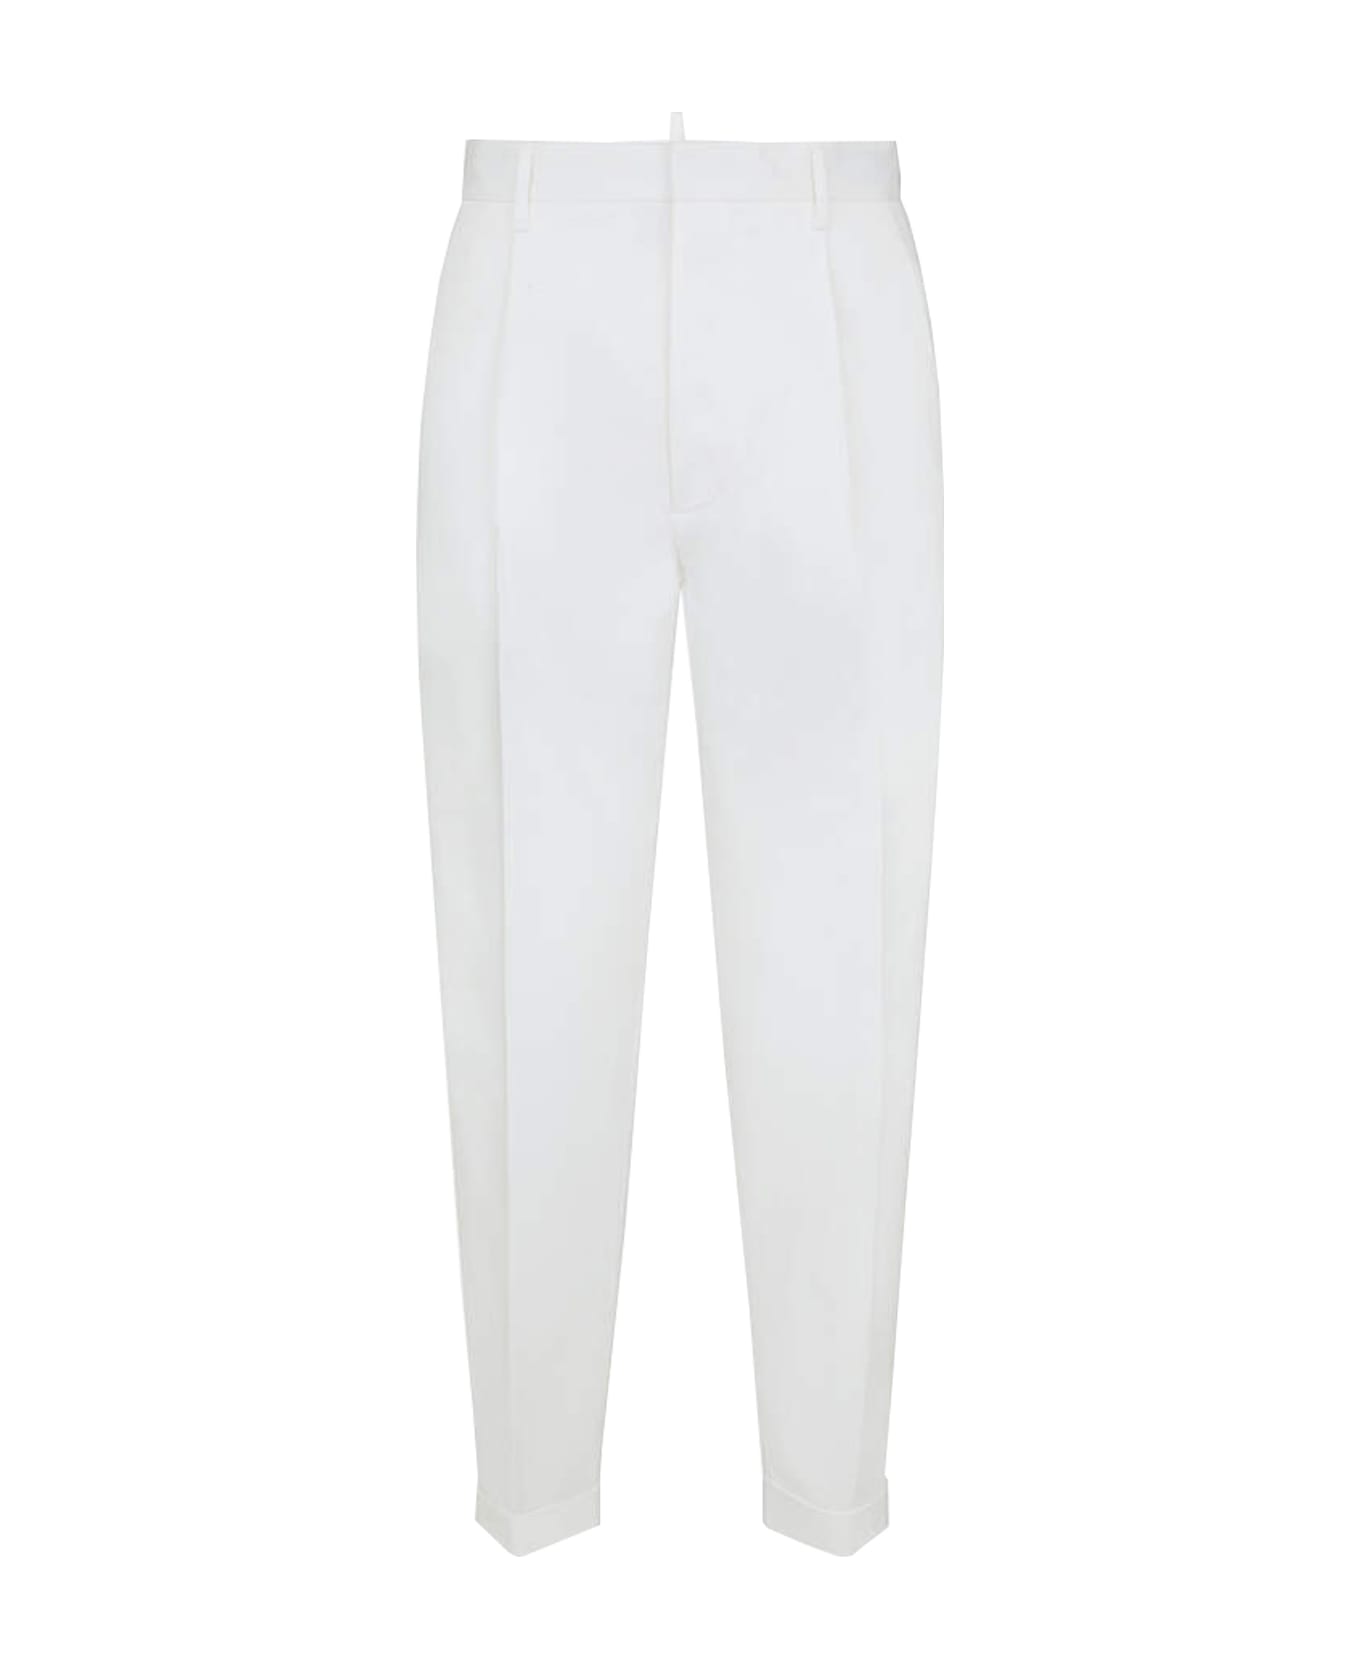 Dsquared2 Tailored Cotton Trousers - White